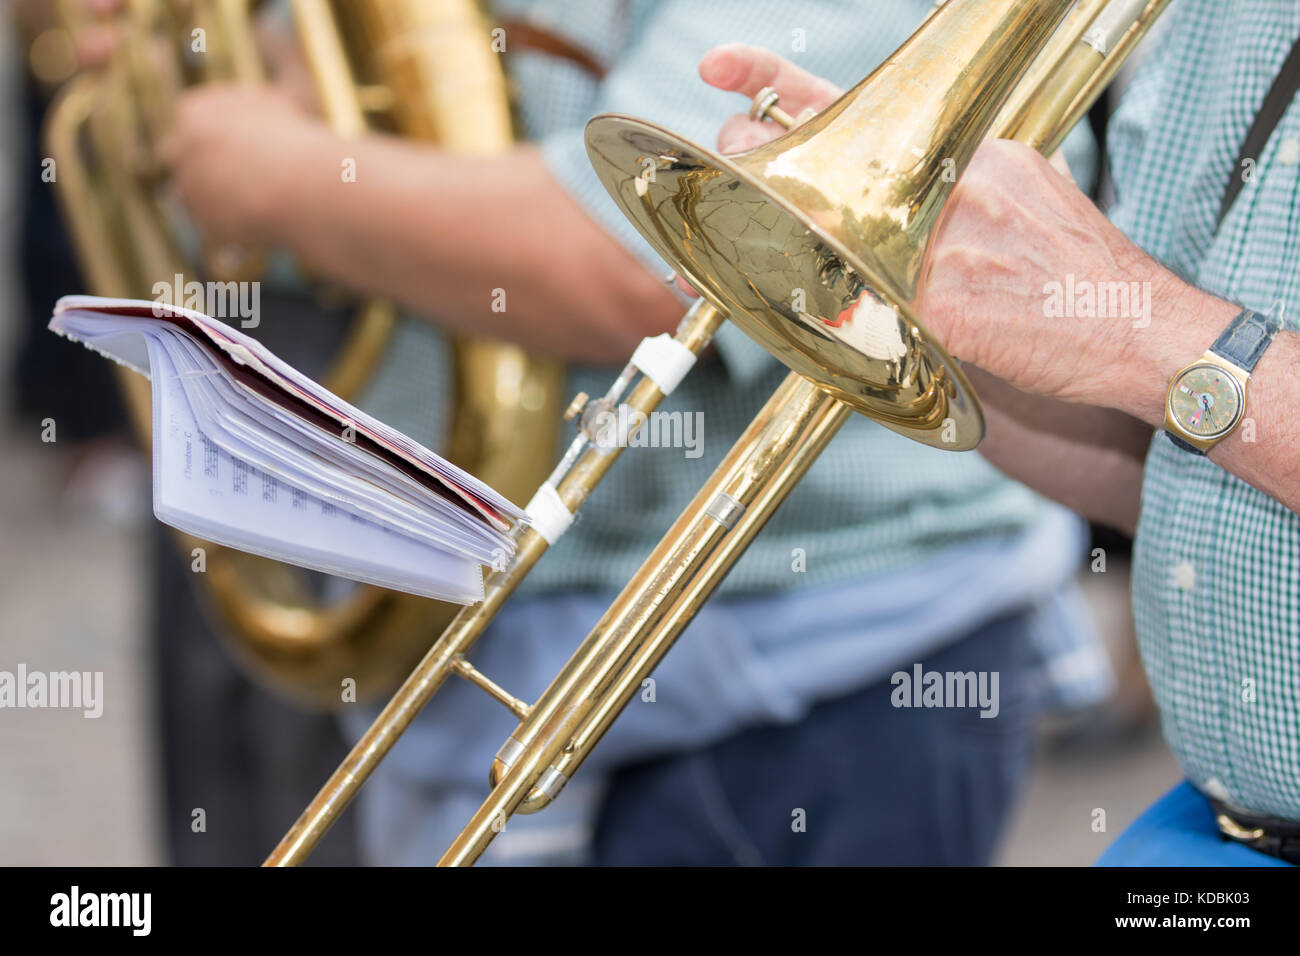 Asti, Italy - September 10, 2017: detail of the musician playing the trombone Stock Photo